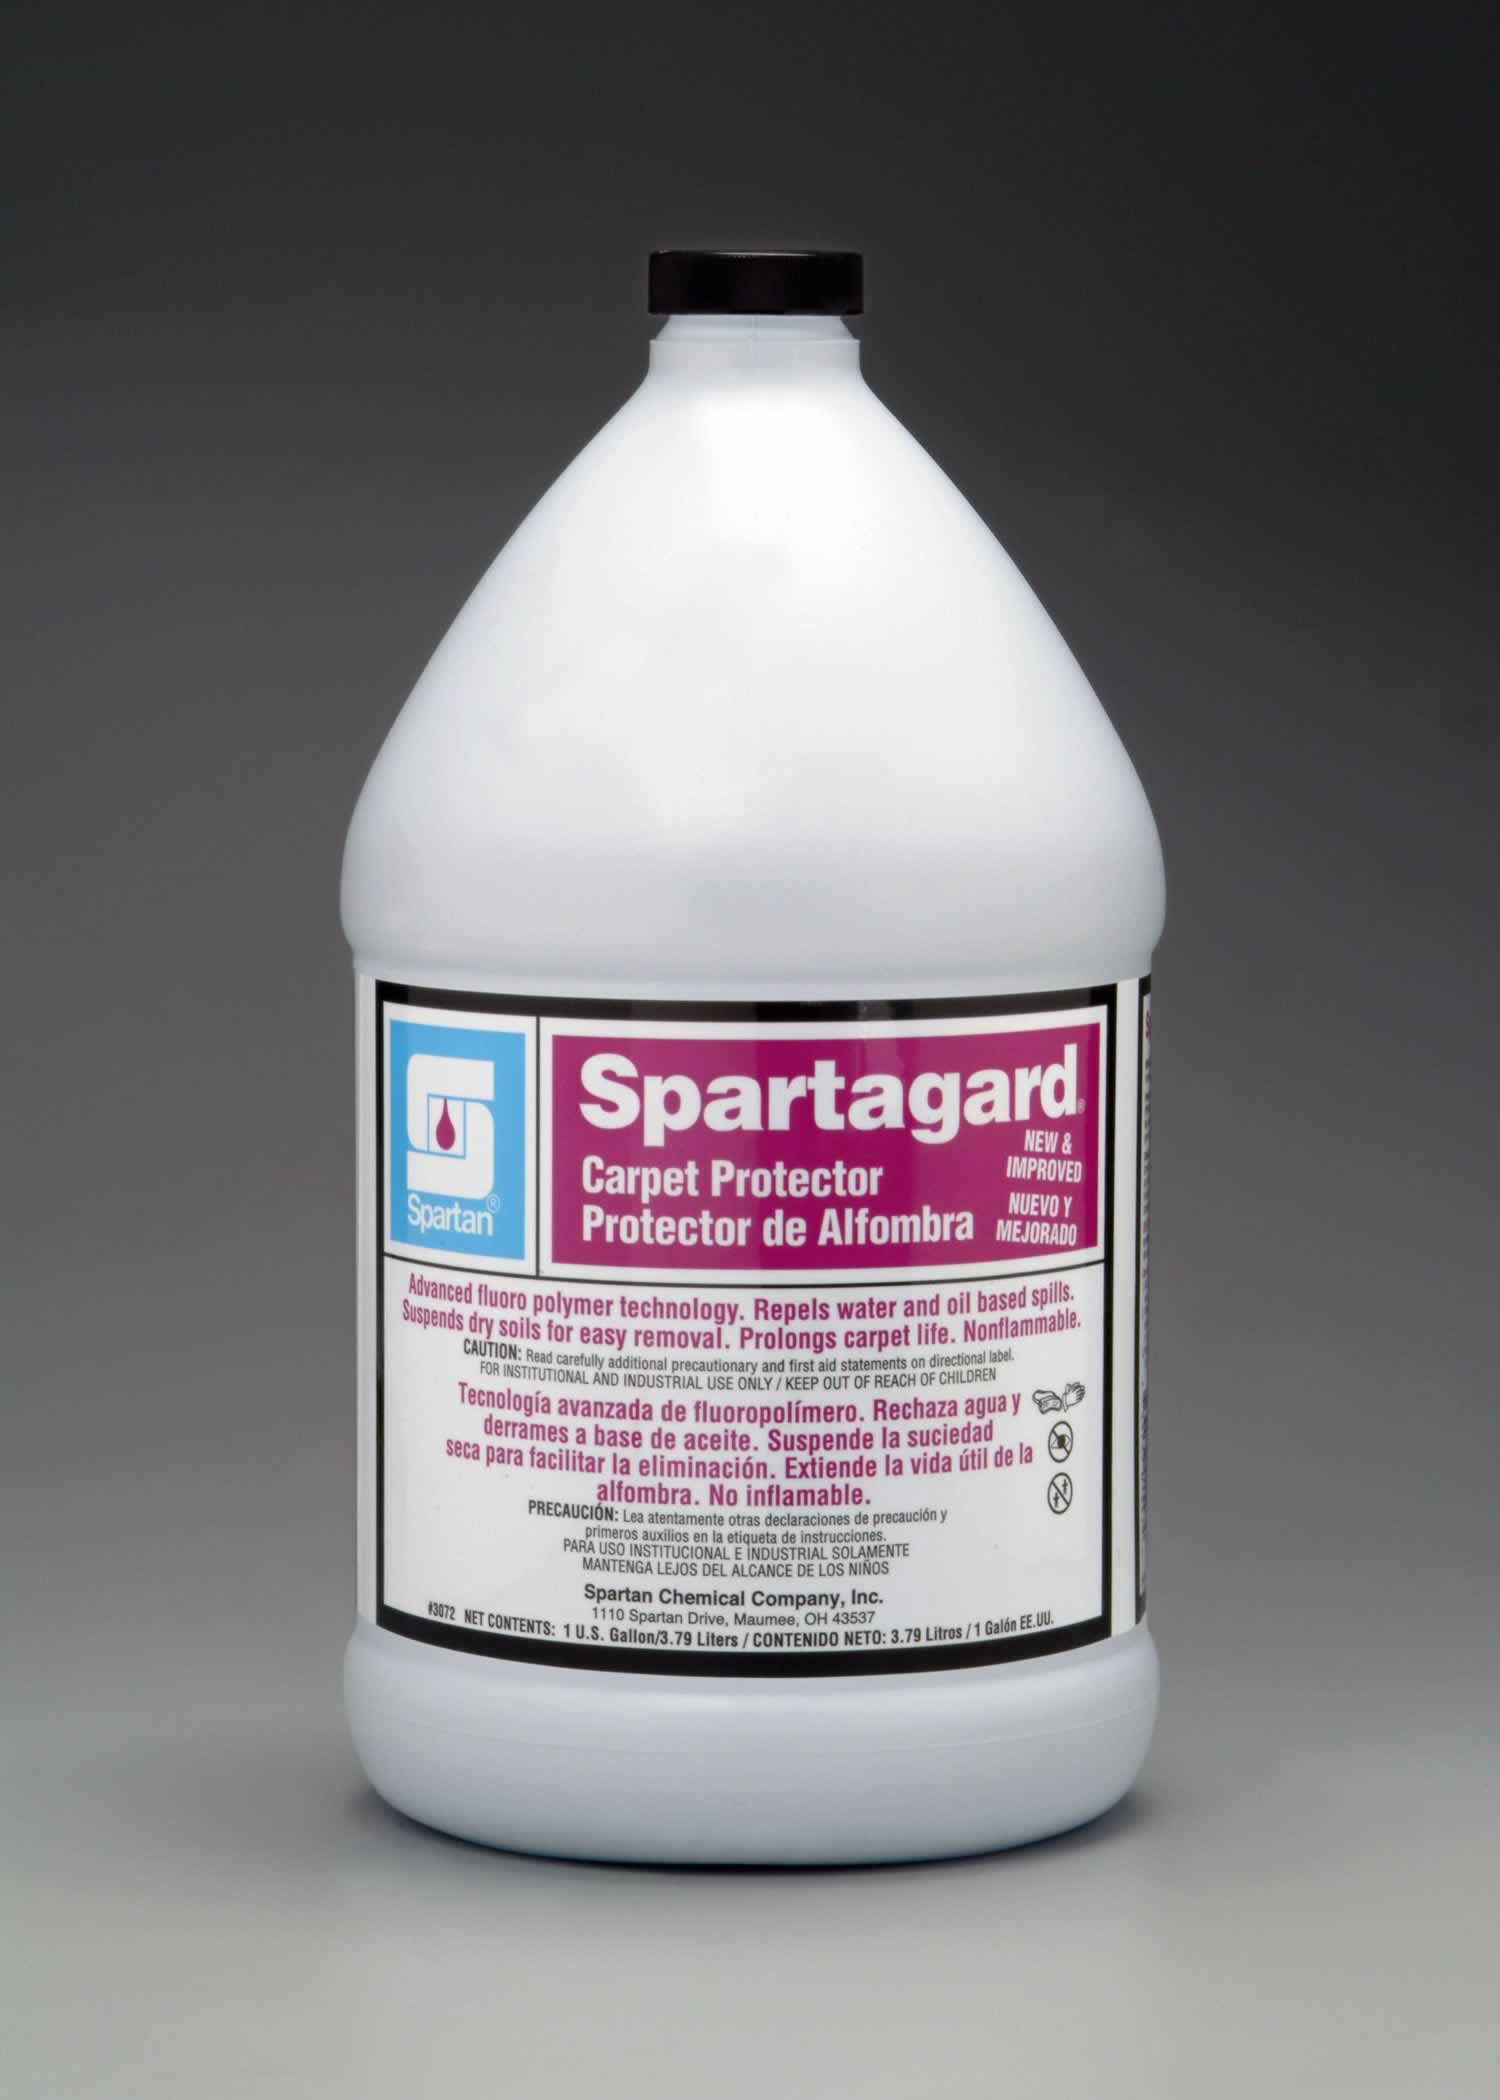 Spartagard carpet protector for repelling water and oil based spills and stains